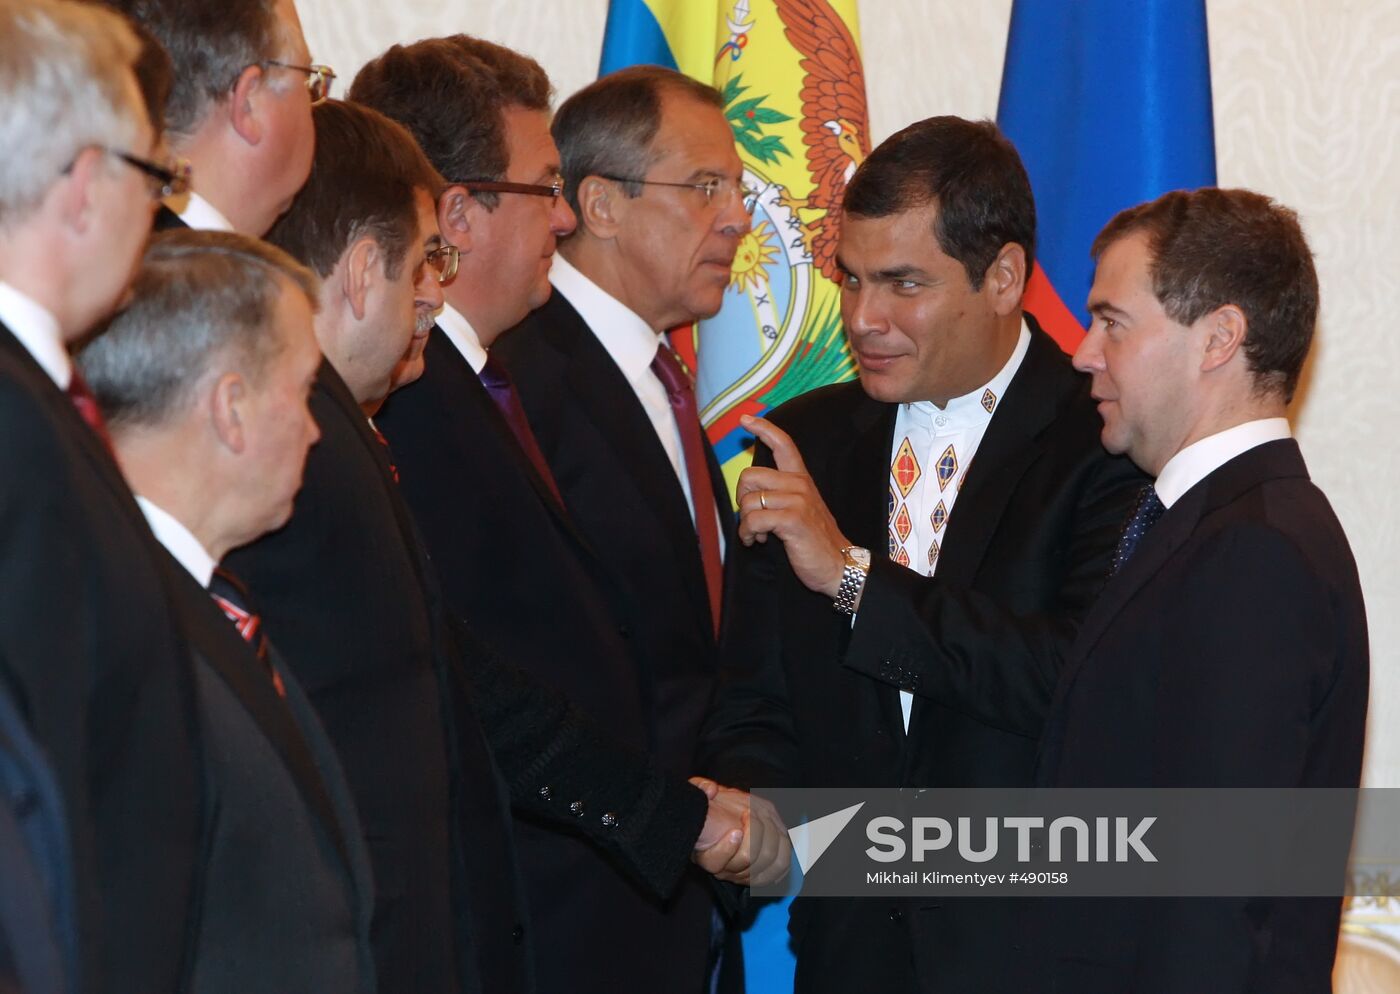 Meeting with Russia and Ecuador delegations